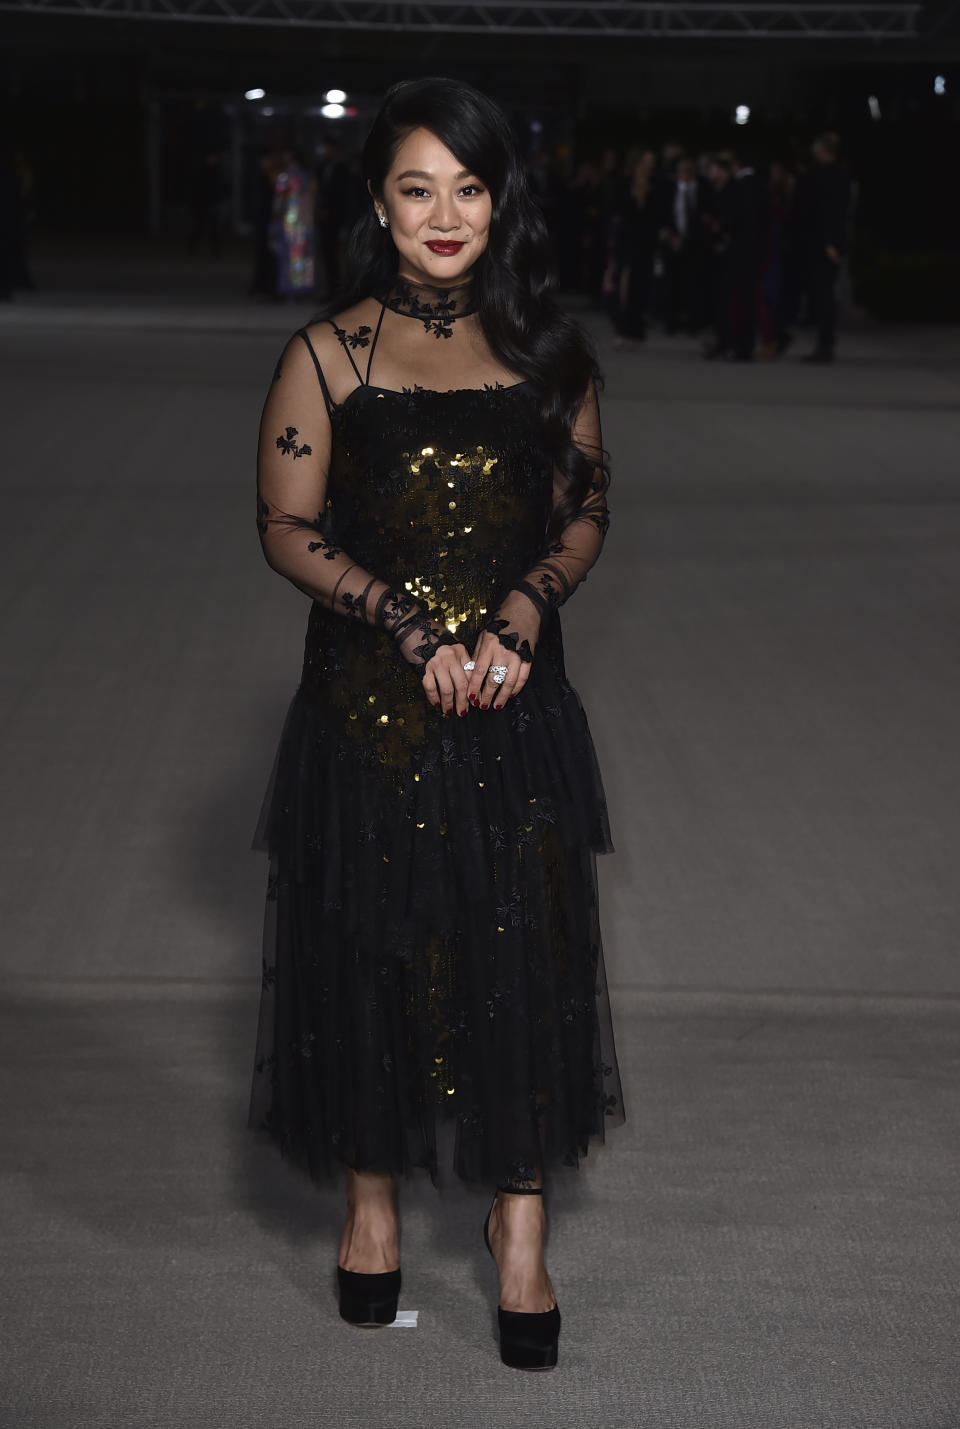 Stephanie Hsu arrives at the second annual Academy Museum gala at the Academy Museum of Motion Pictures on Saturday, Oct. 15, 2022, in Los Angeles. (Photo by Jordan Strauss/Invision/AP)